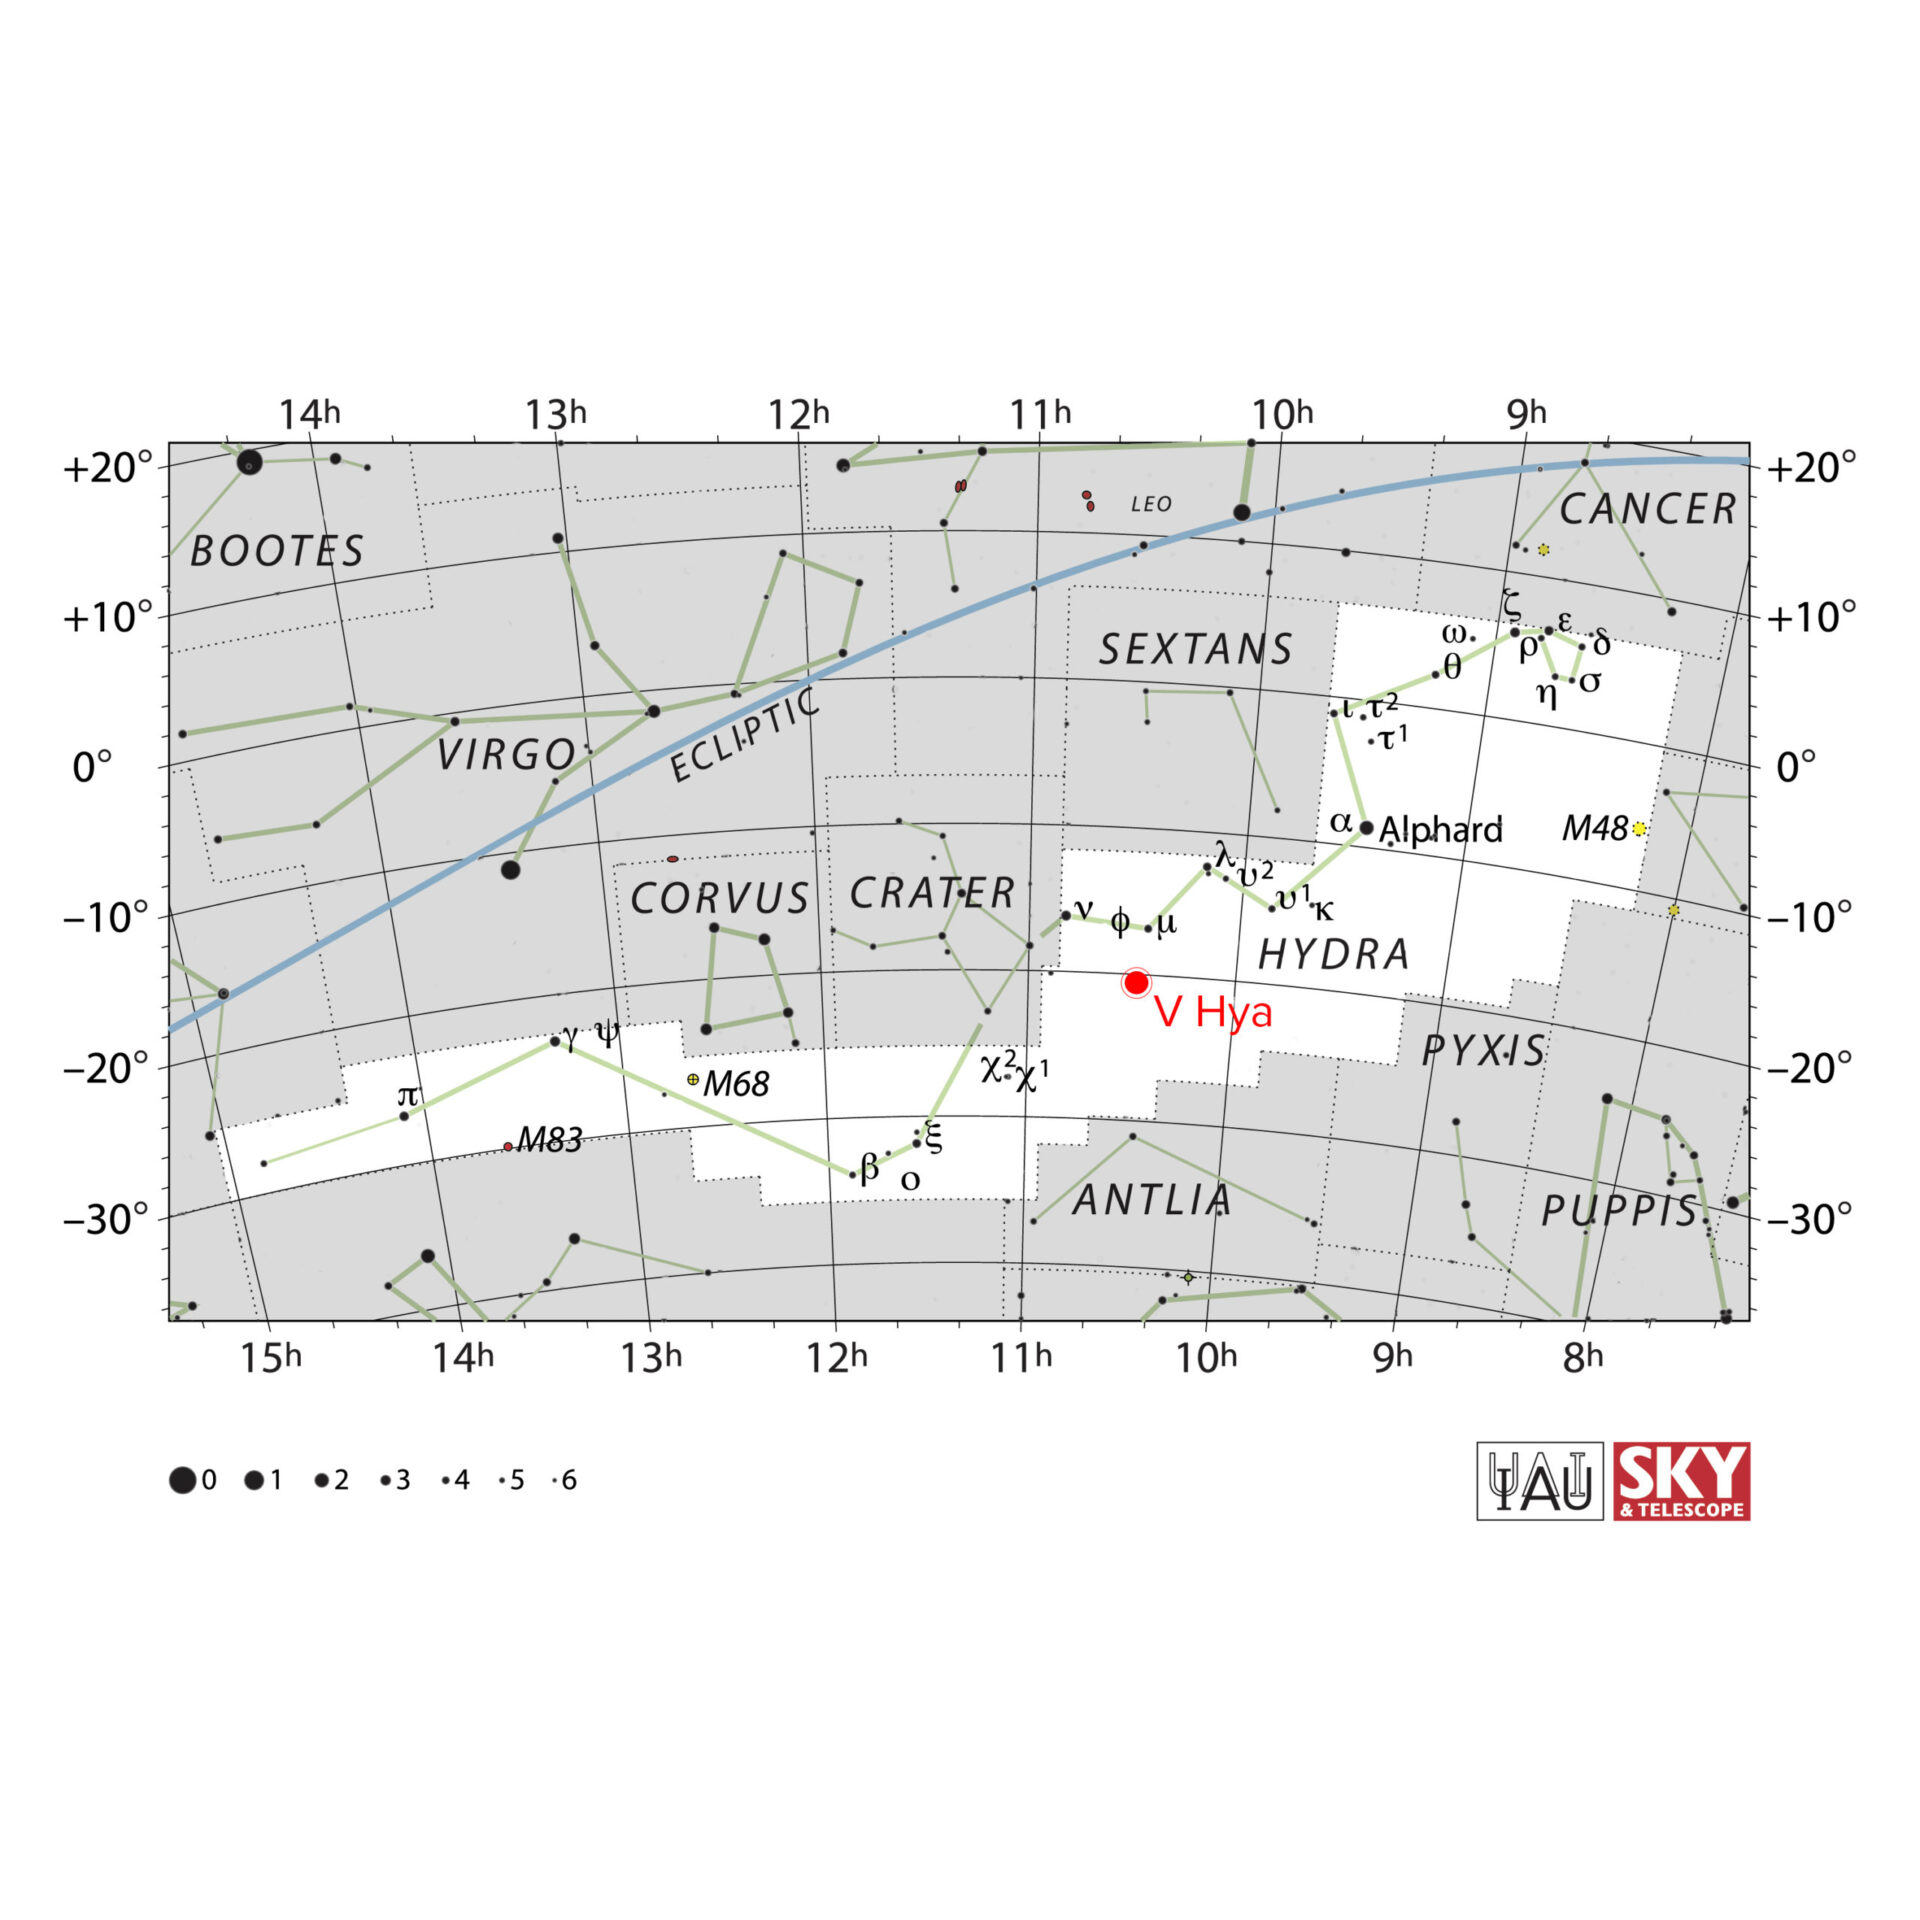 <p>V Hydrae is a carbon-rich star located 1,300 light-years away in the constellation Hydra. It is the subject of recent observations revealing the violent deaths of stars, which include, in the case of V Hya, explosive ejections of plasma into space that shape the structural environment around the star. Credit: IAU and Sky & Telescope</p>
